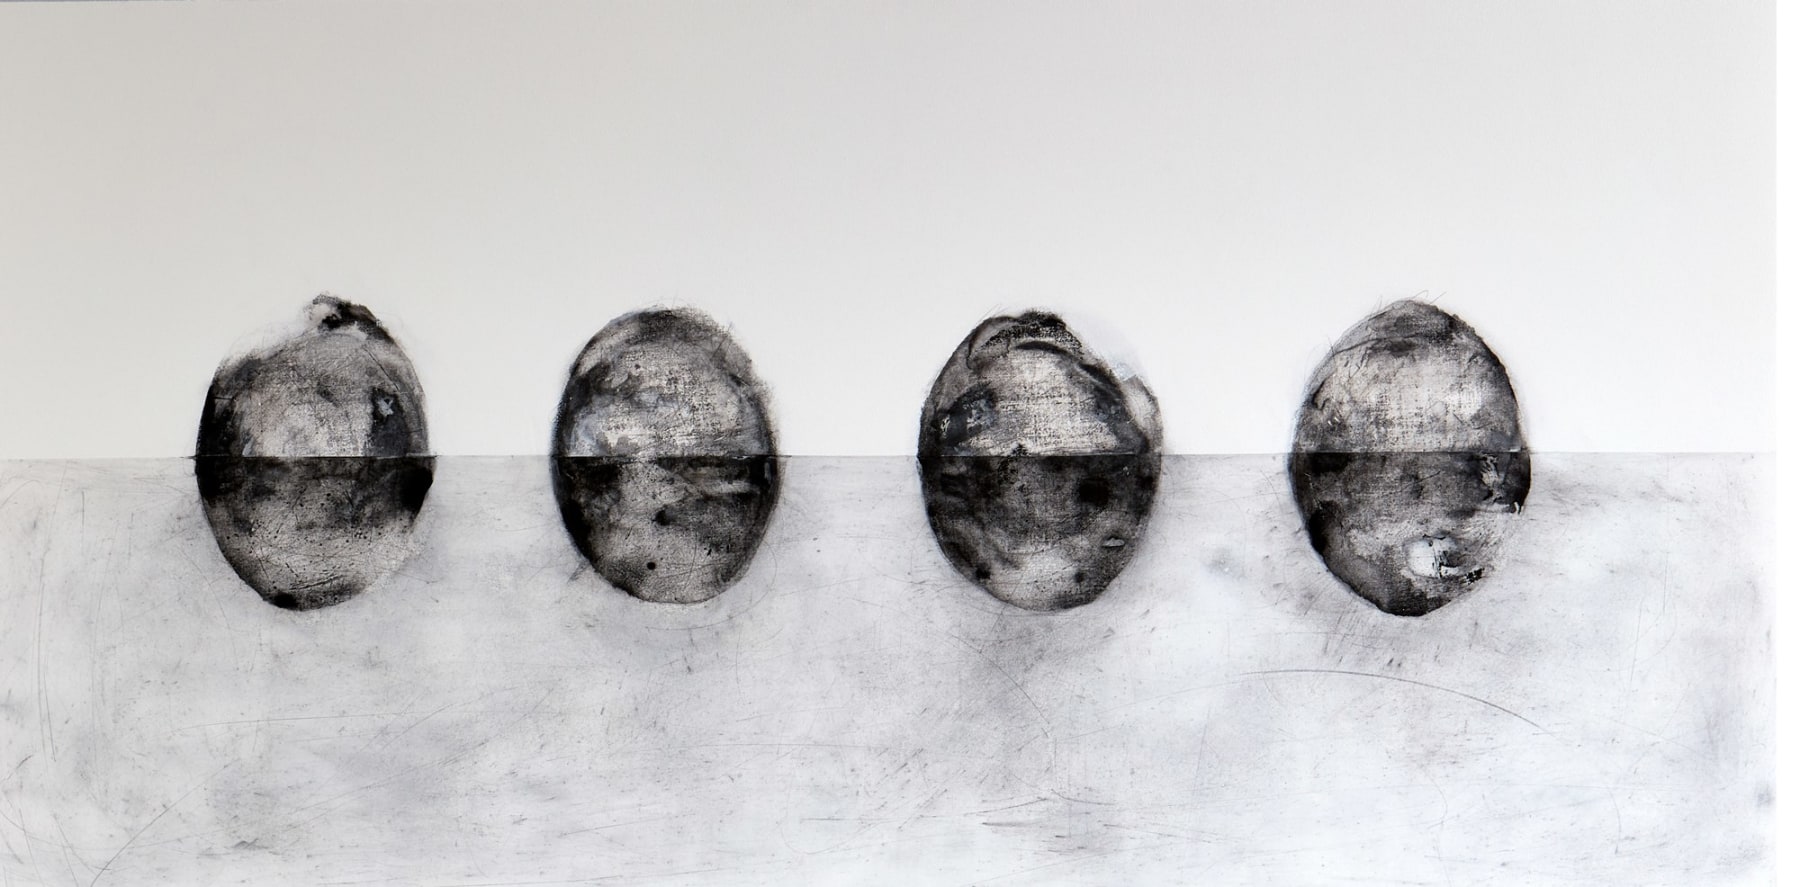 Andrew Wapinski
Untitled XXXII, 2022
Anthracite Coal, Pigmented Ice, Acrylic, &amp;amp; Ink on Linen Mounted Panel
30h x 60w x 2.50d in